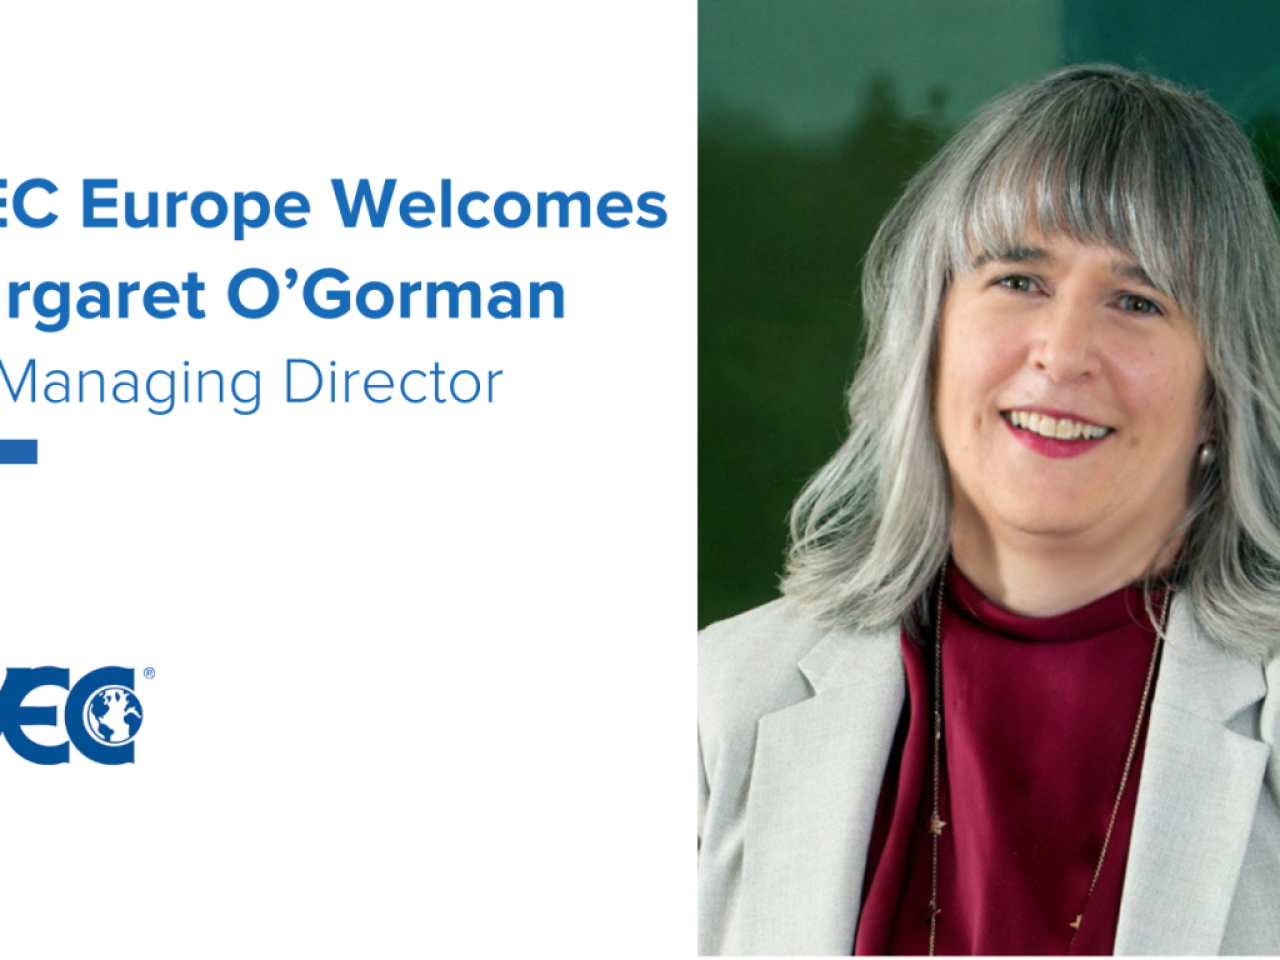 Text welcoming Margaret O'Gorman as Managing Director, with WEC logo and picture of Margaret O'Gorman